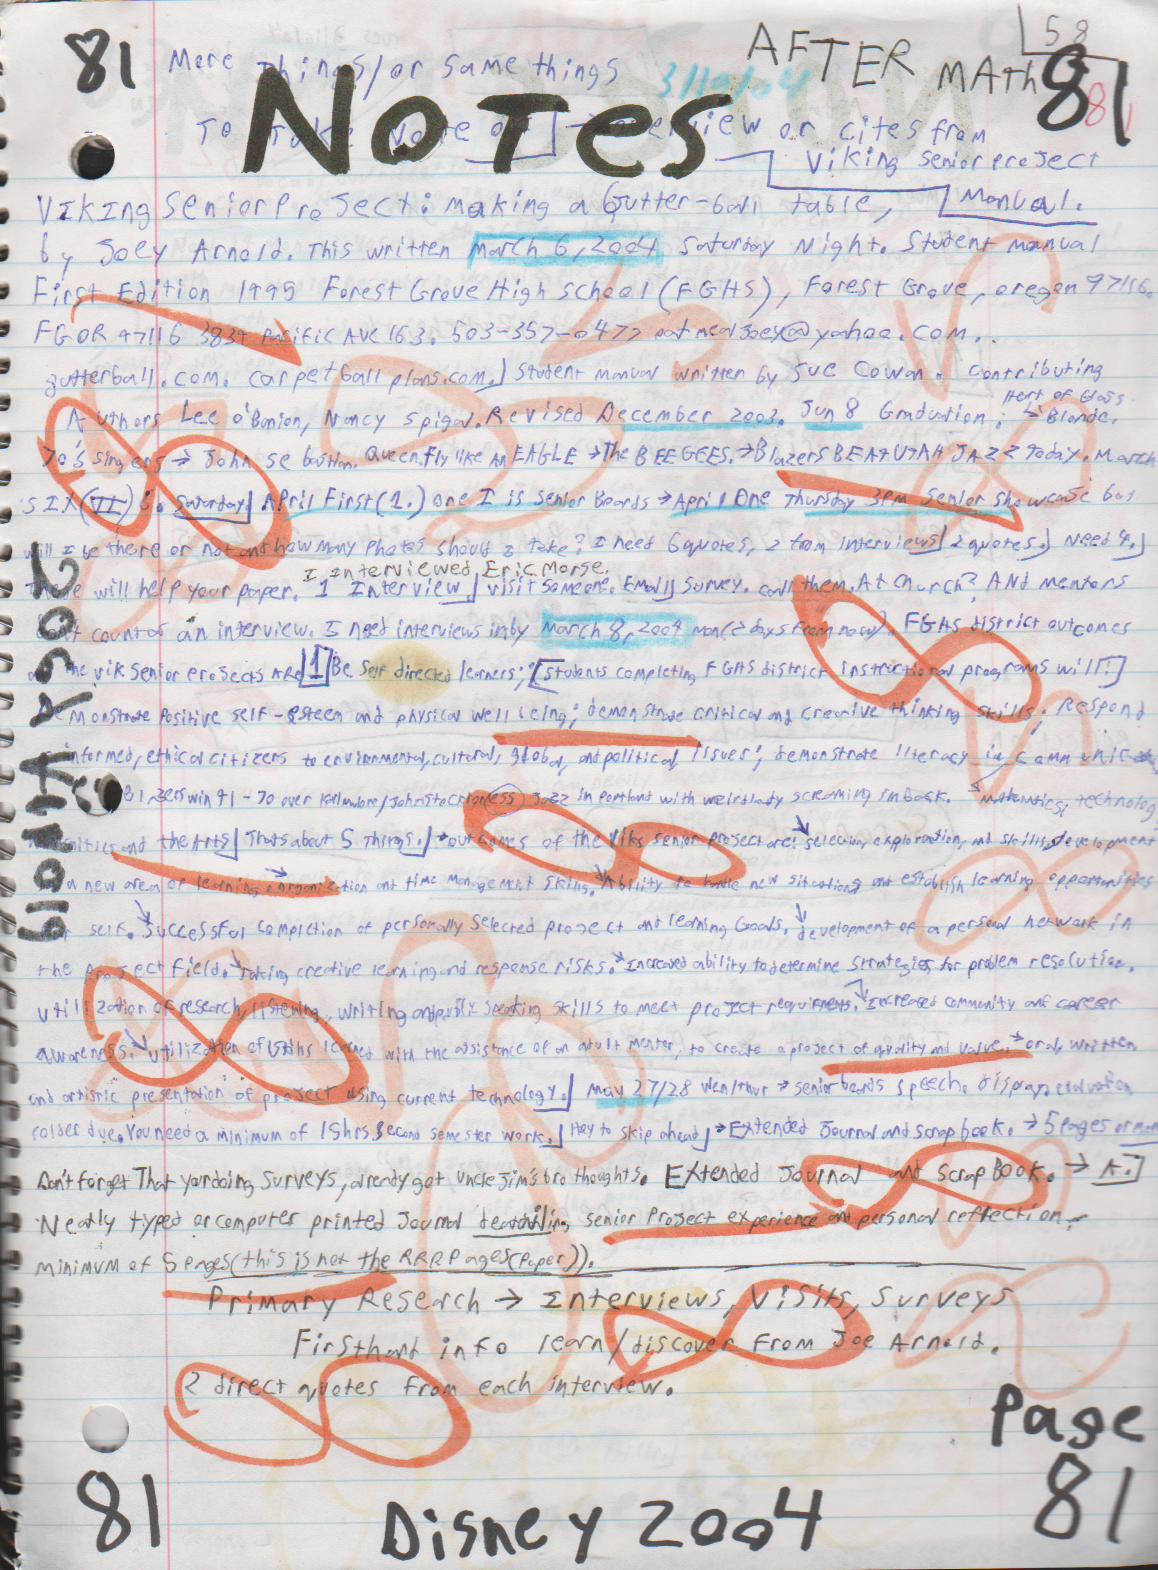 2004-01-29 - Thursday - Carpetball FGHS Senior Project Journal, Joey Arnold, Part 02, 96pages numbered, Notebook-79.png